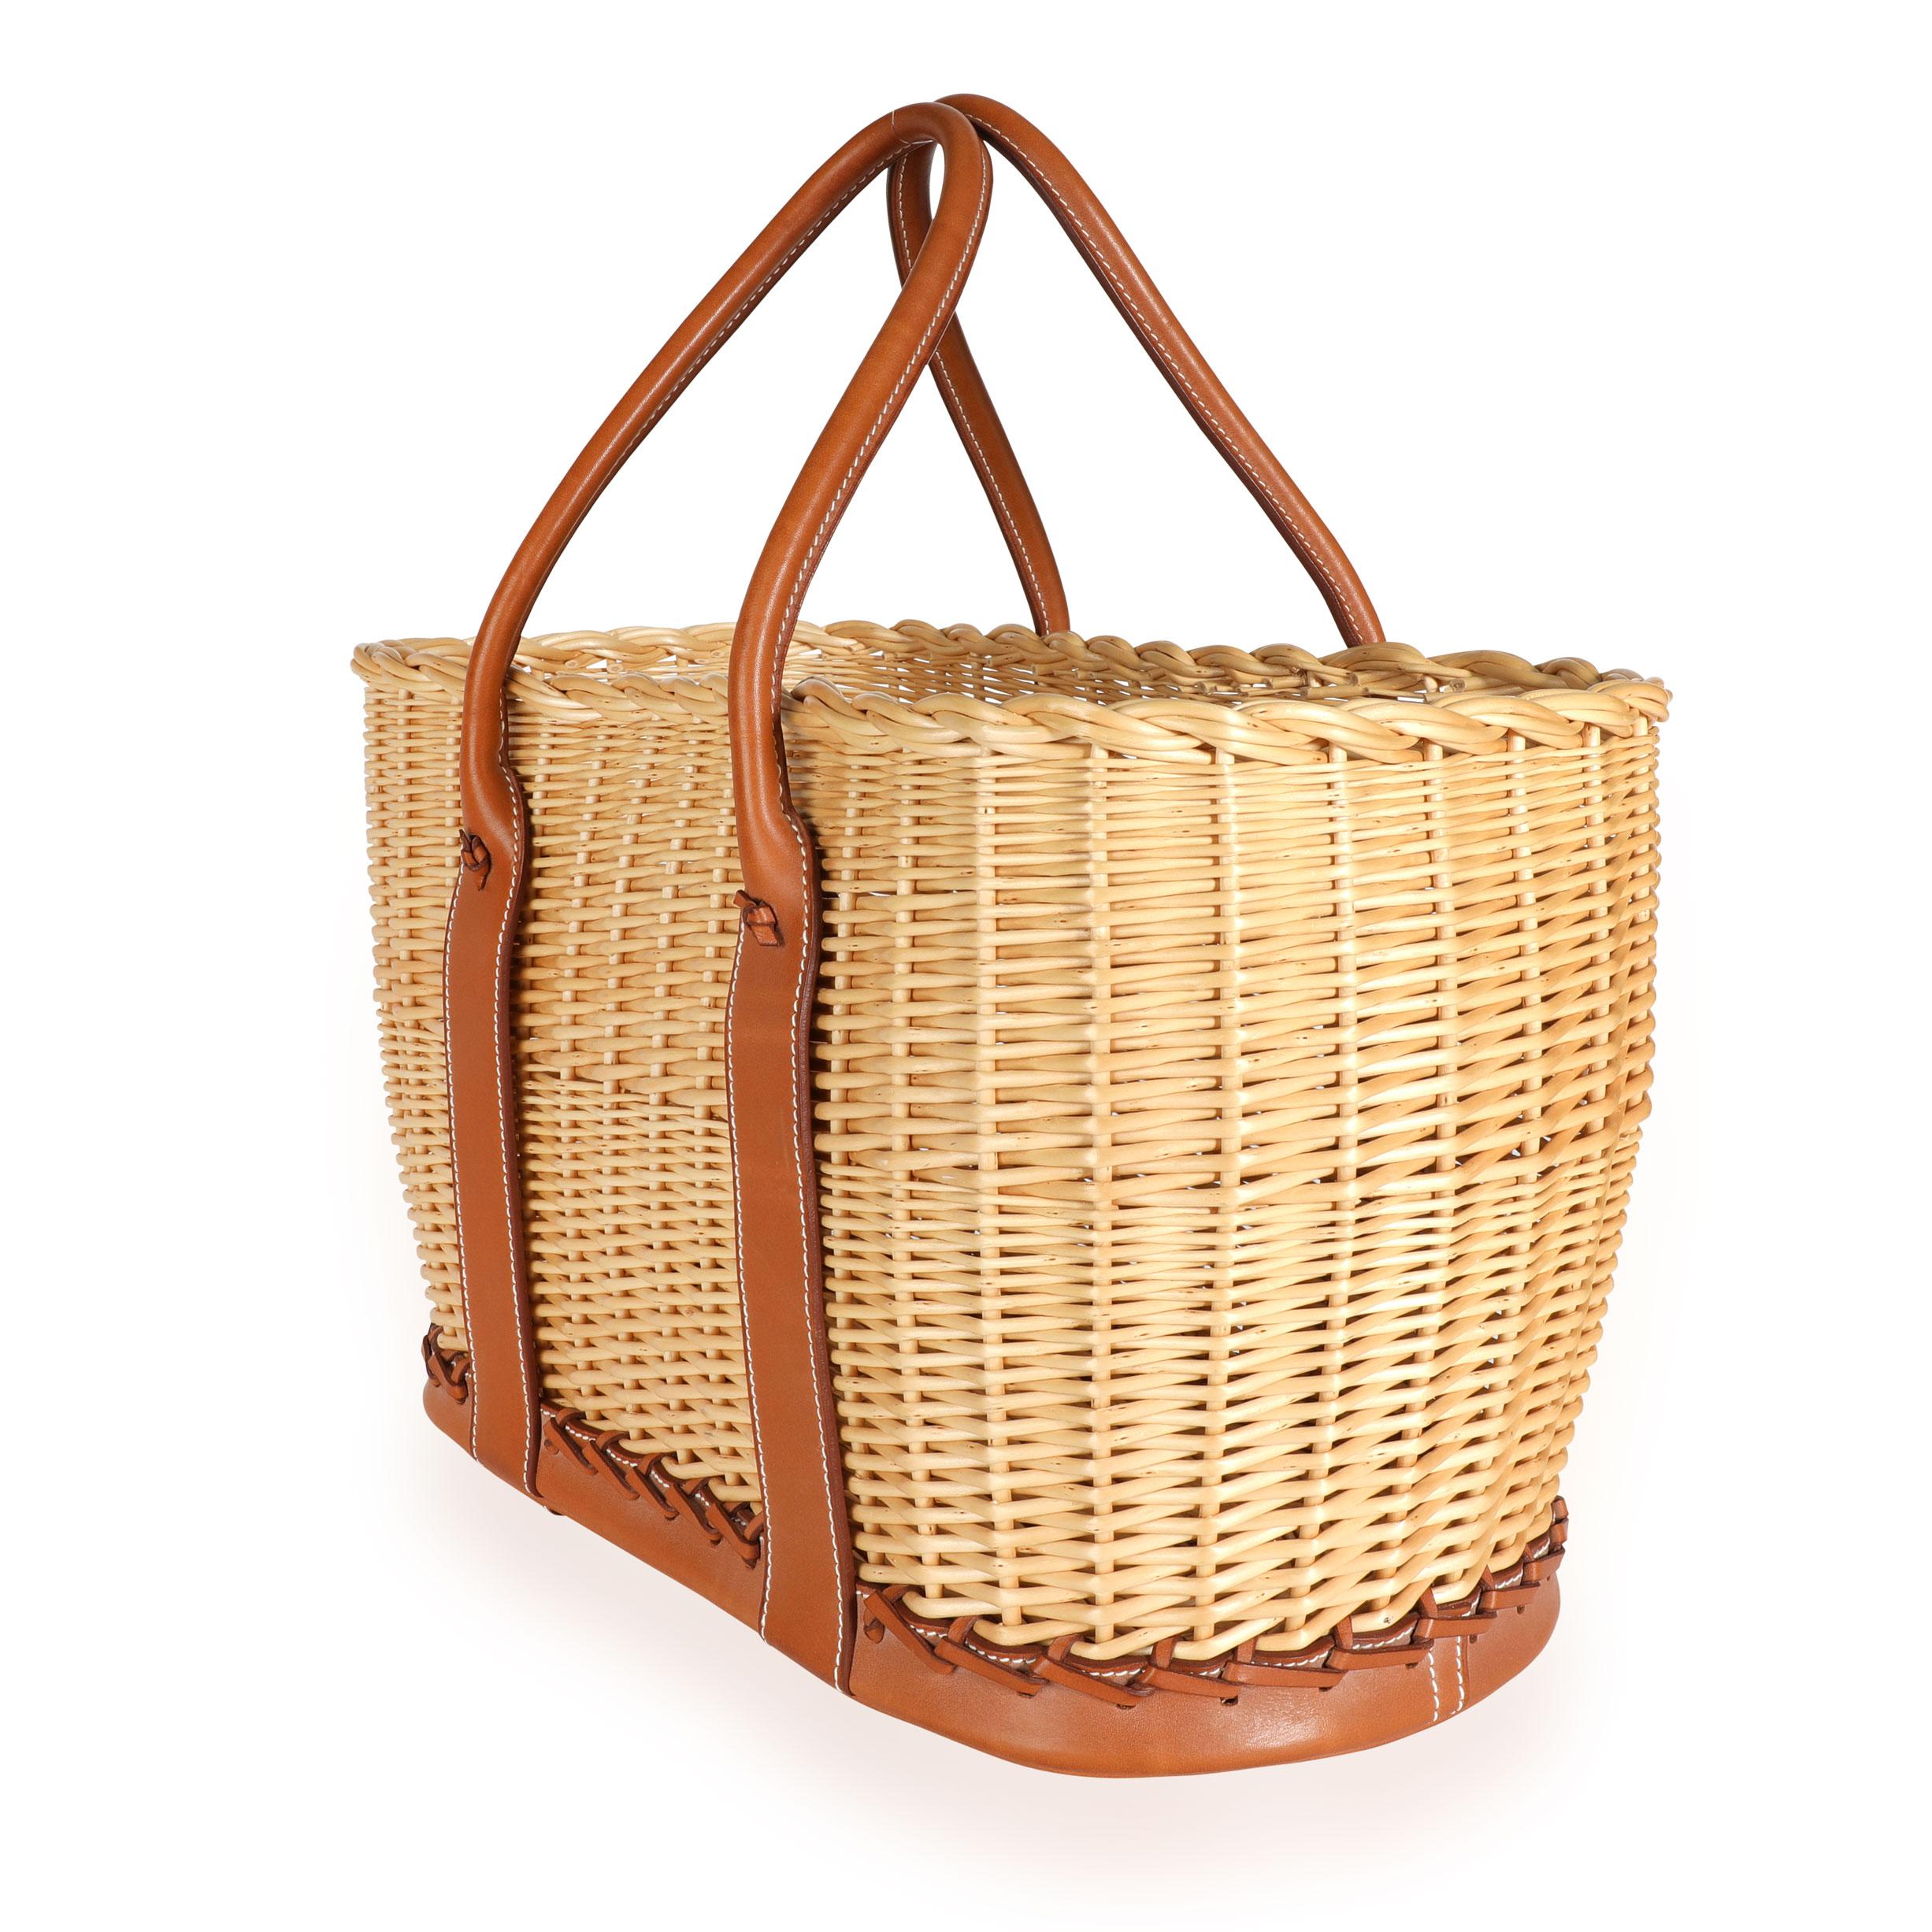 Hermès Limited Edition Naturel Barénia & Osier Picnic Garden Party
SKU: 110839

Handbag Condition: Very Good
Condition Comments: Very Good Condition. Patina and marks to leather throughout. Faint wear to wicker.

Brand: Hermès
Model: Garden